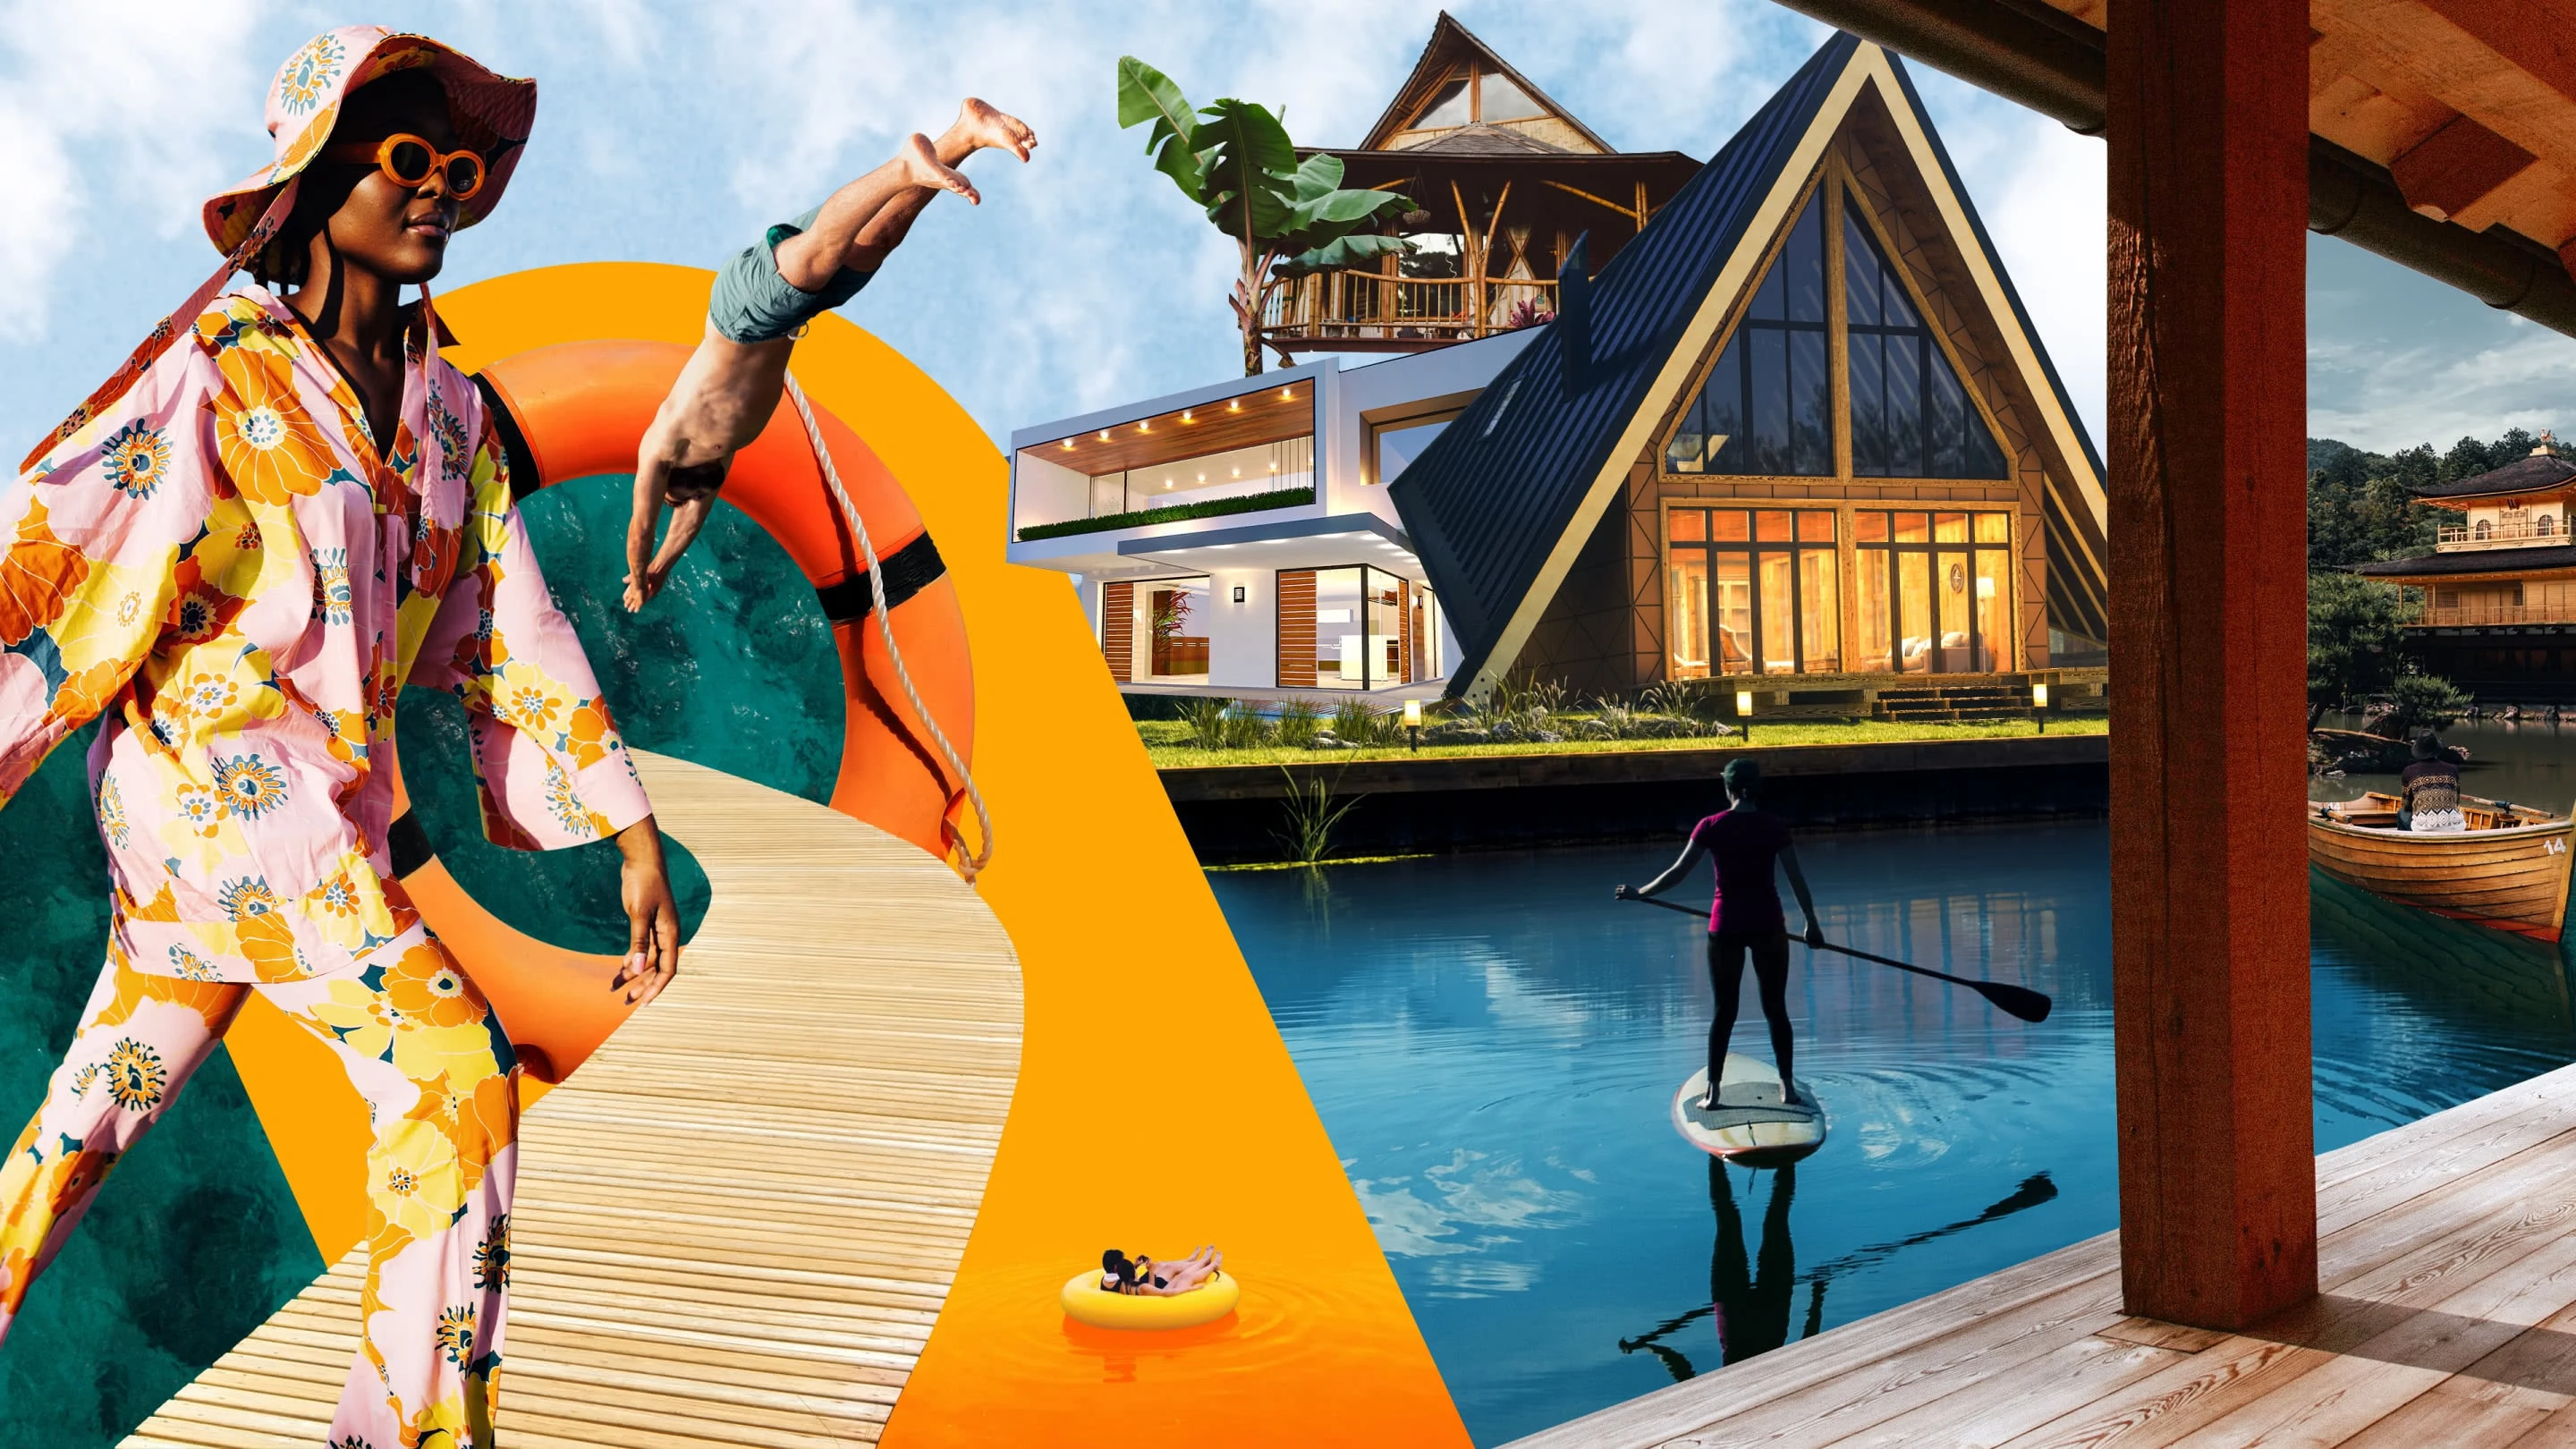 Colourful collage of lake-themed items. A Black woman, wearing a pink and floral lake outfit, is on the left, next to a boardwalk and a diver jumping through an orange circle into the water. An A-frame boat house is in the centre, behind a paddleboarder on a lake. A roofed dock with post is on the right.